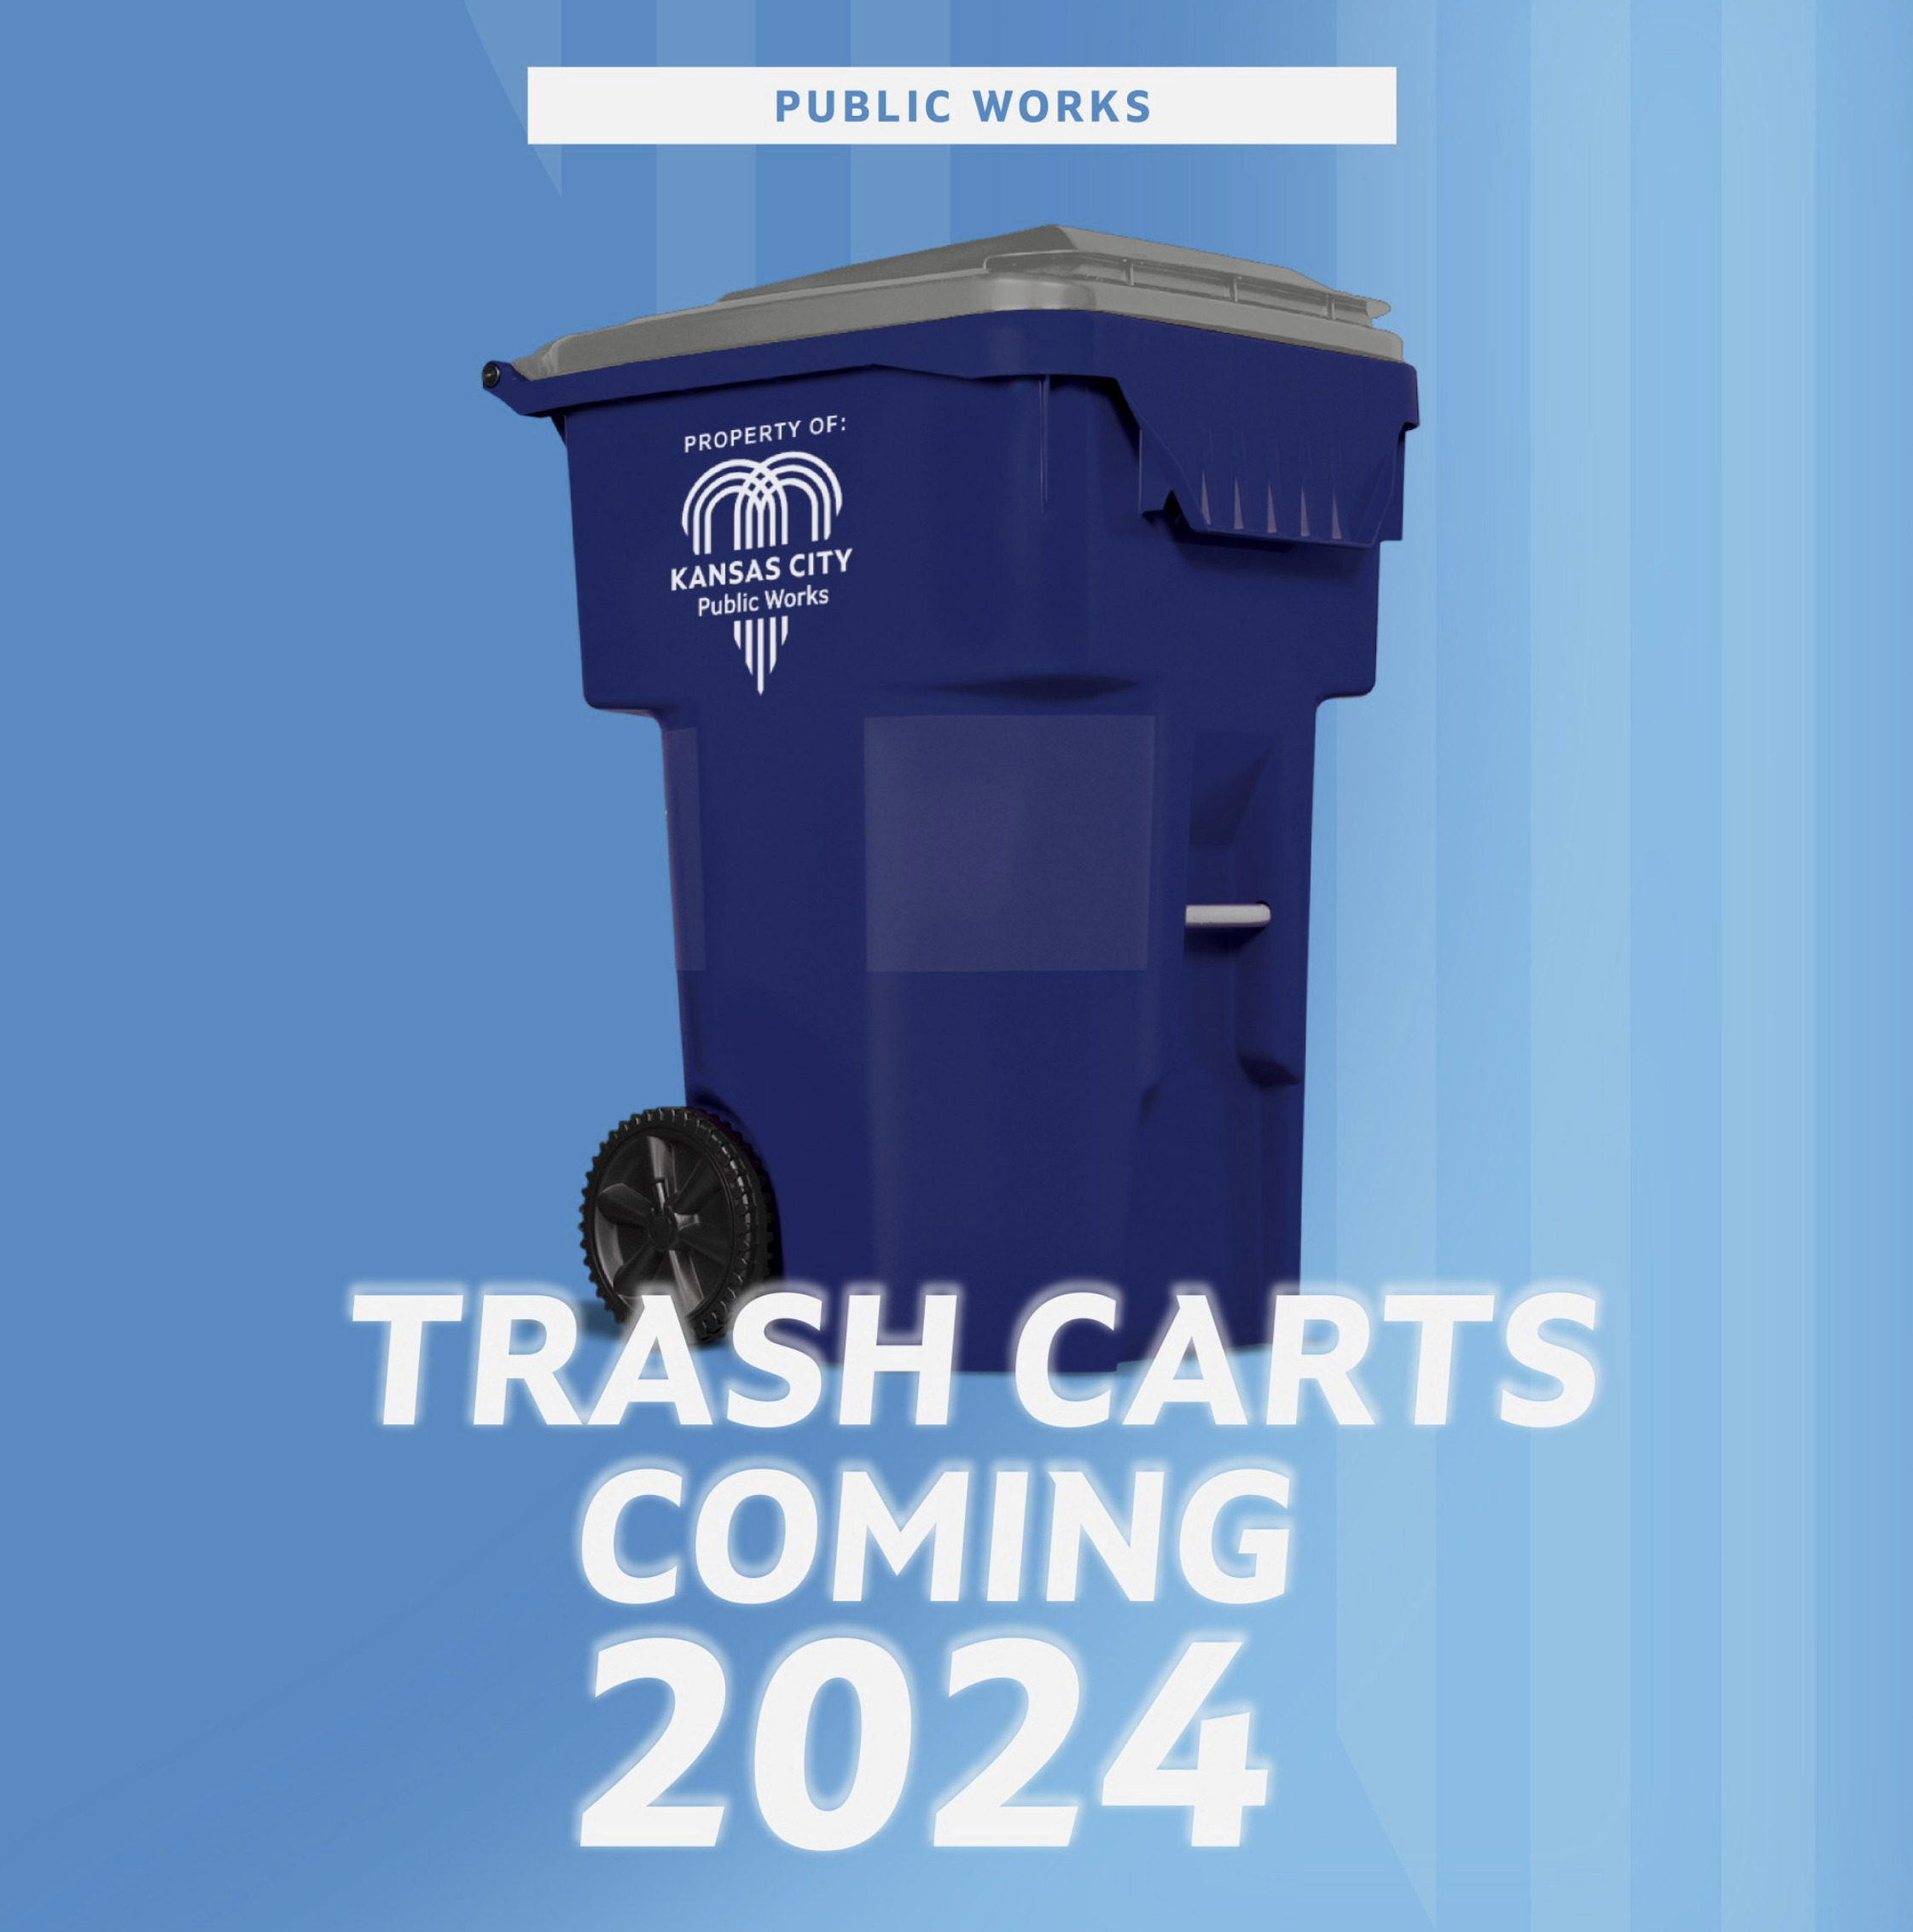 Trash carts available this spring